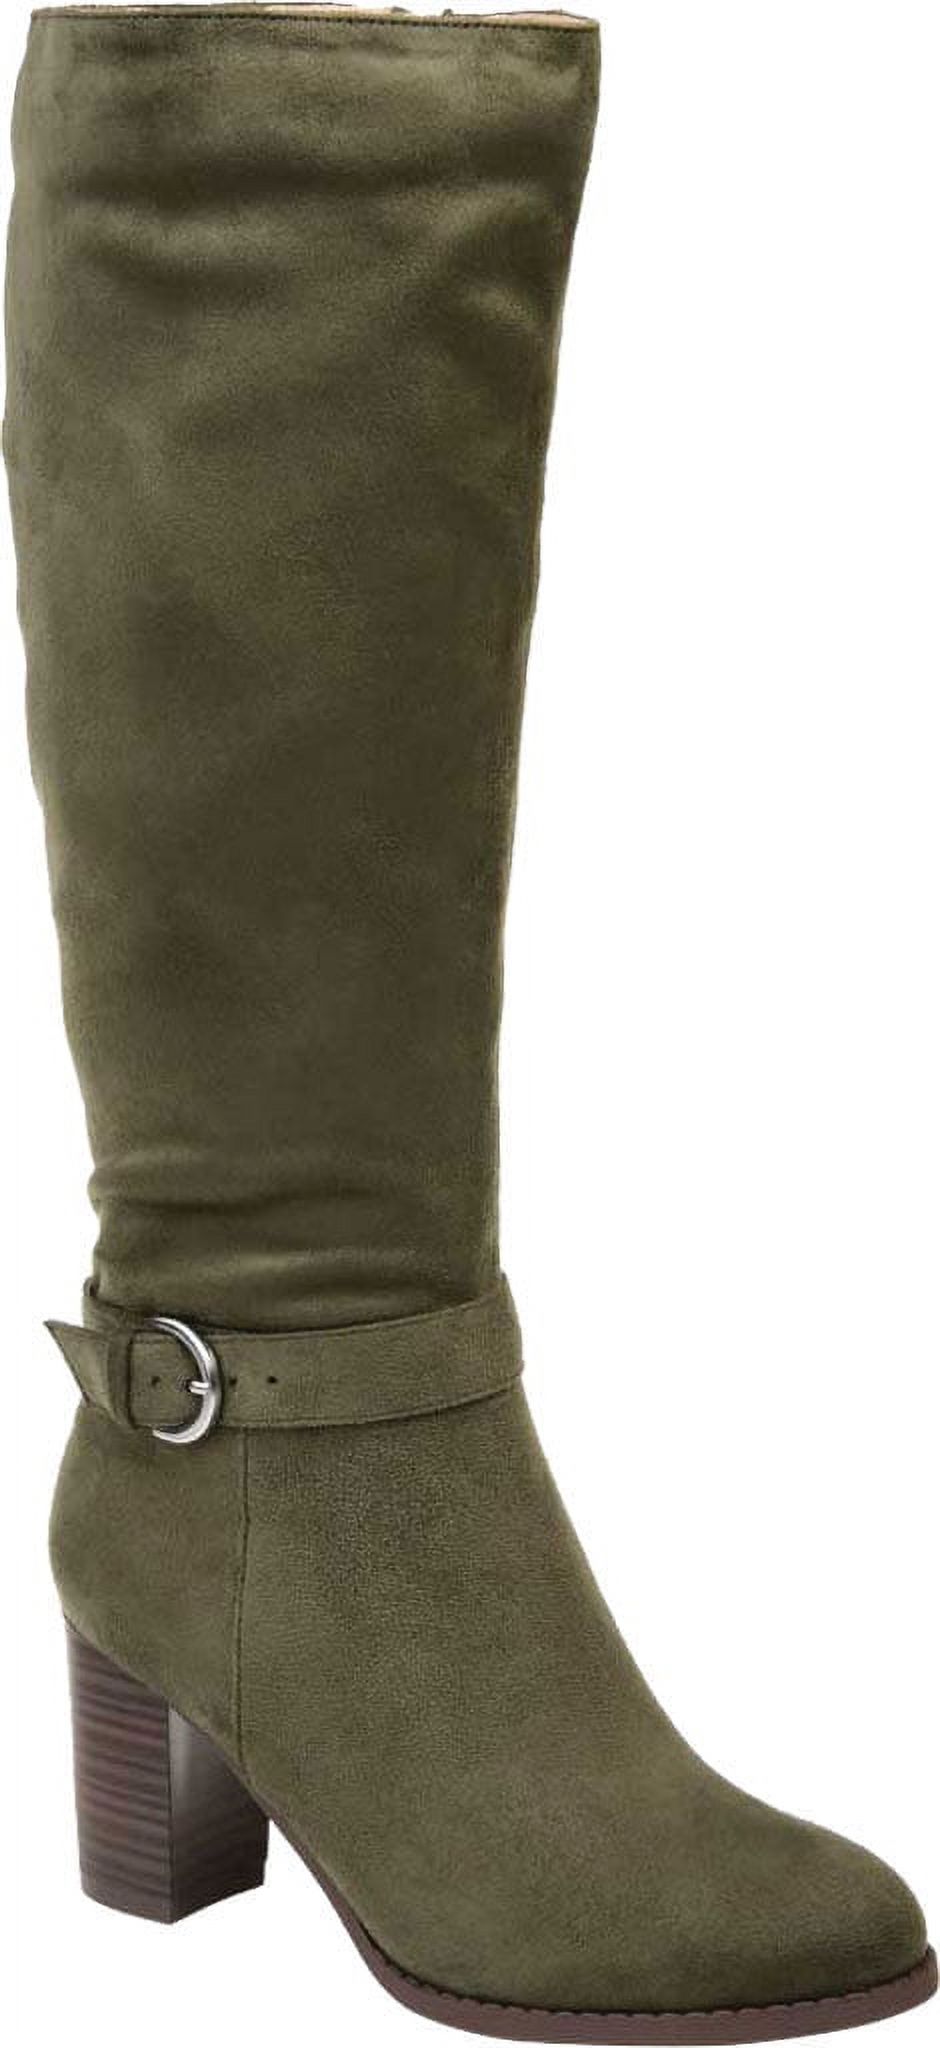 KNS International Women's Journee Collection Joelle Extra Wide Calf Knee High Boot Green Size 7M - image 1 of 3